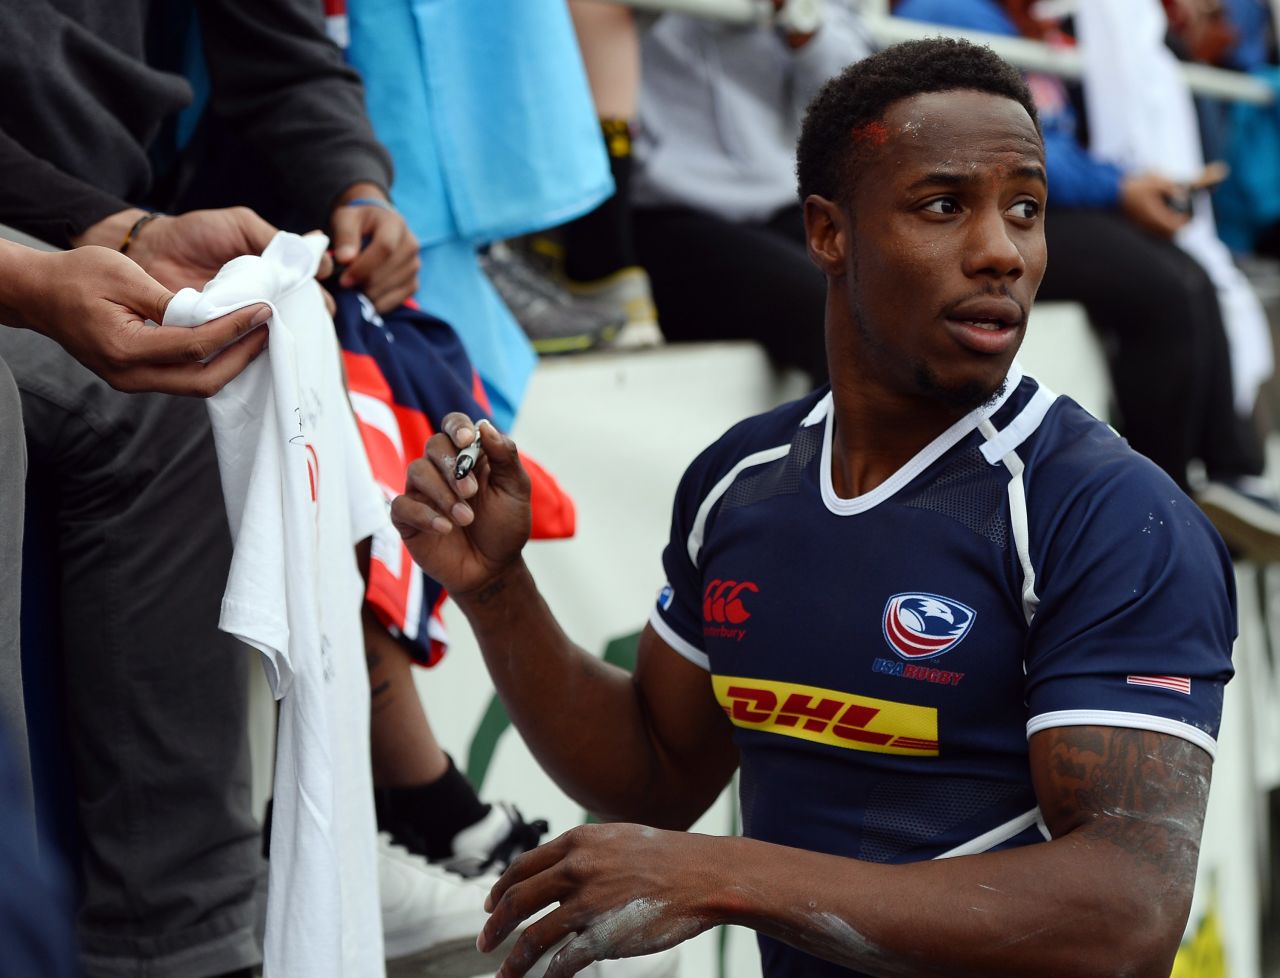 U.S. star Carlin Isles scored a superb try on Friday on the first day in Las Vegas, though the Americans lost 19-12 to Argentina before being beaten 14-12 by France.